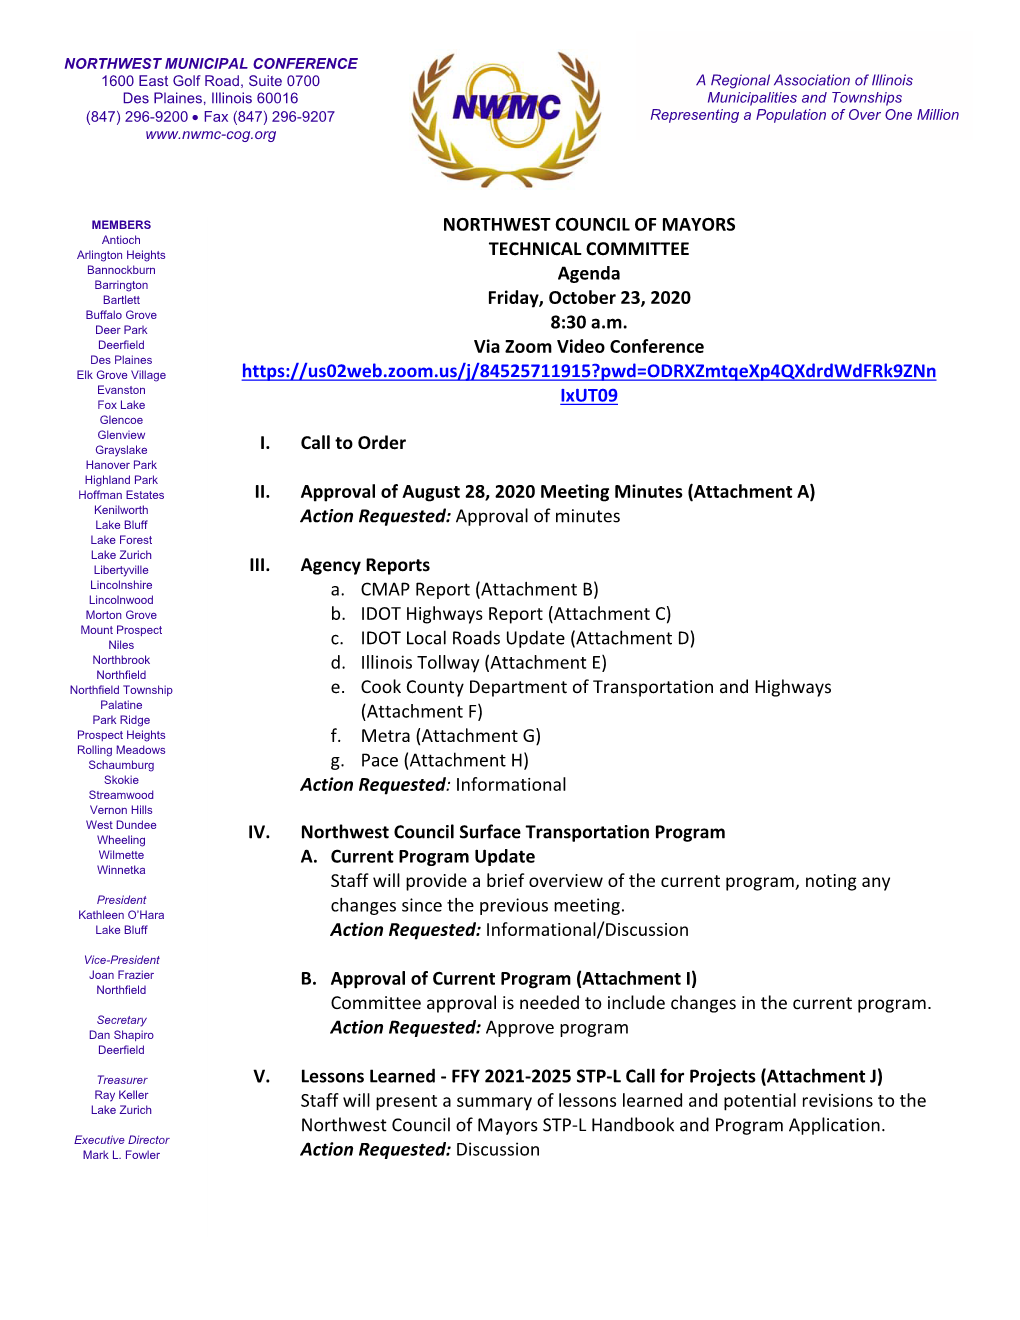 NORTHWEST COUNCIL of MAYORS TECHNICAL COMMITTEE Agenda